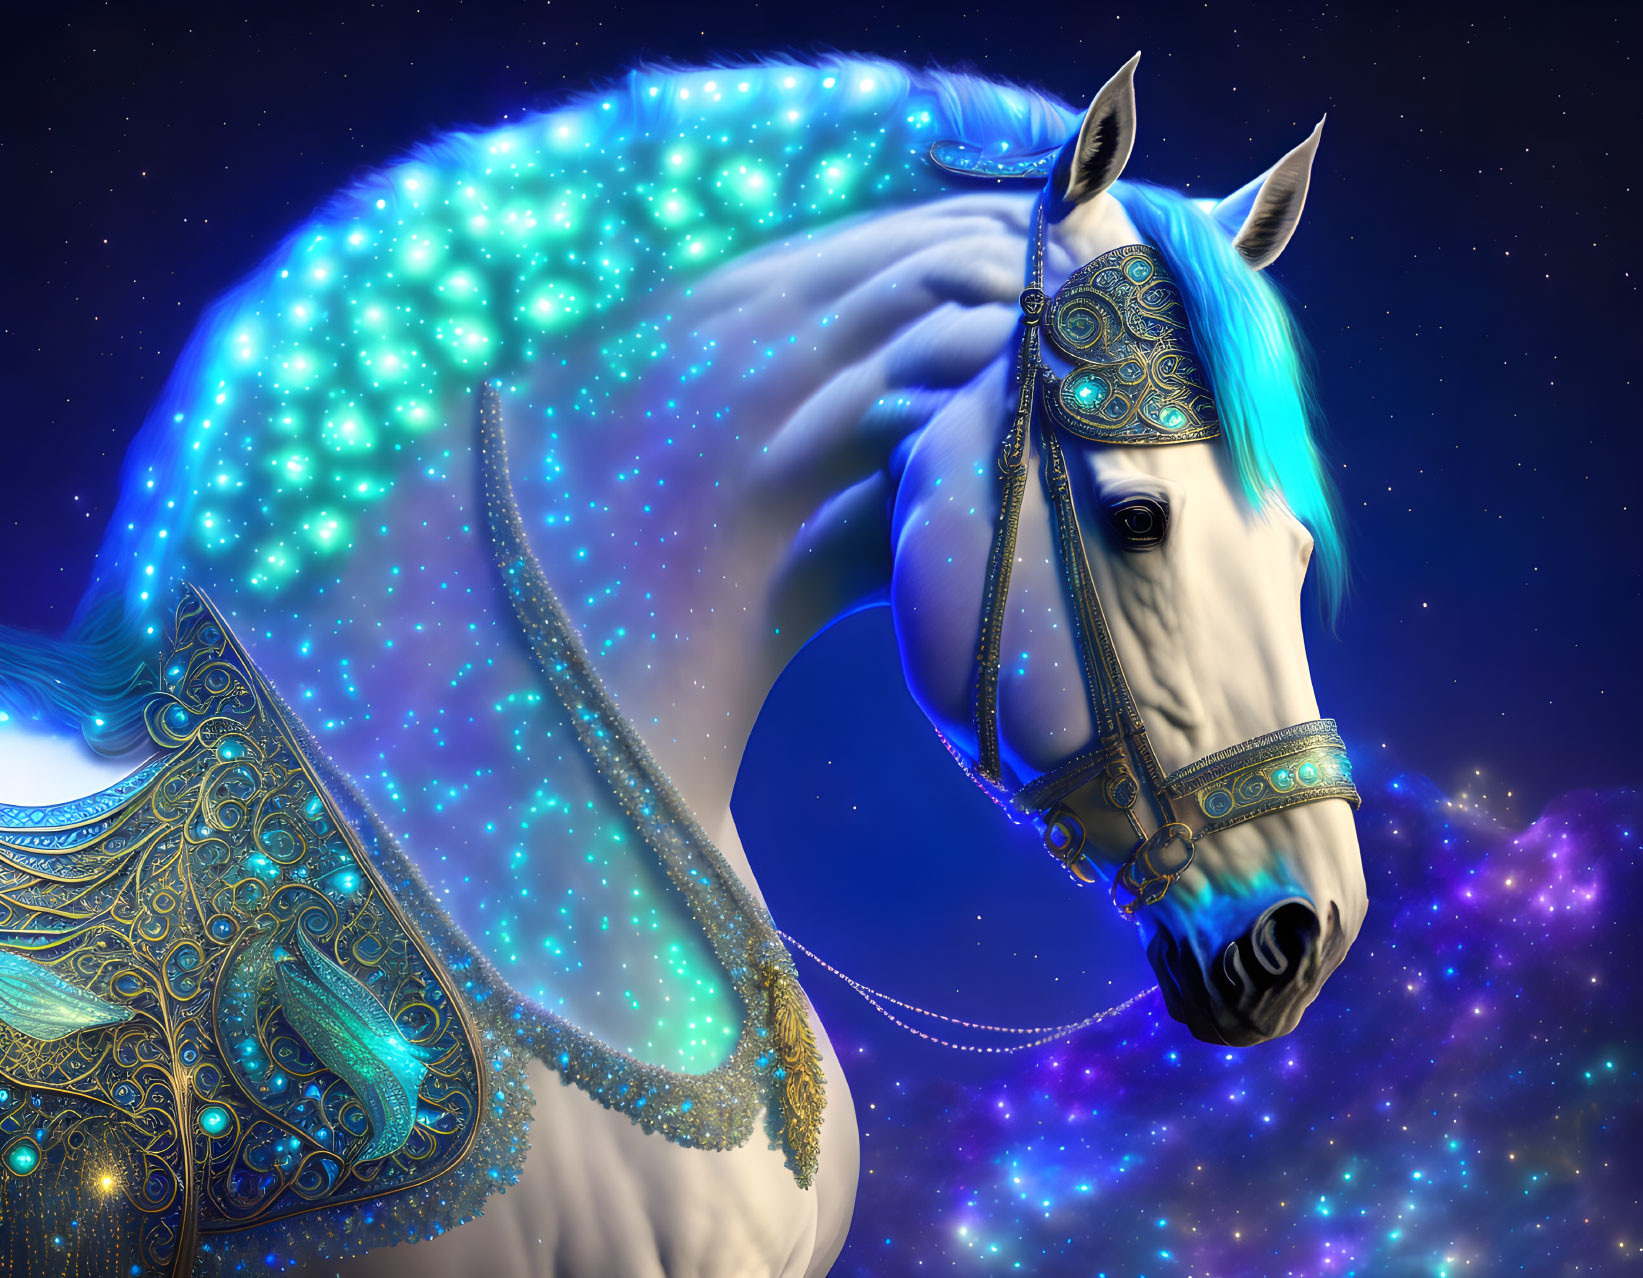 Majestic white horse with glowing blue mane and ornate teal and gold tack against starry night